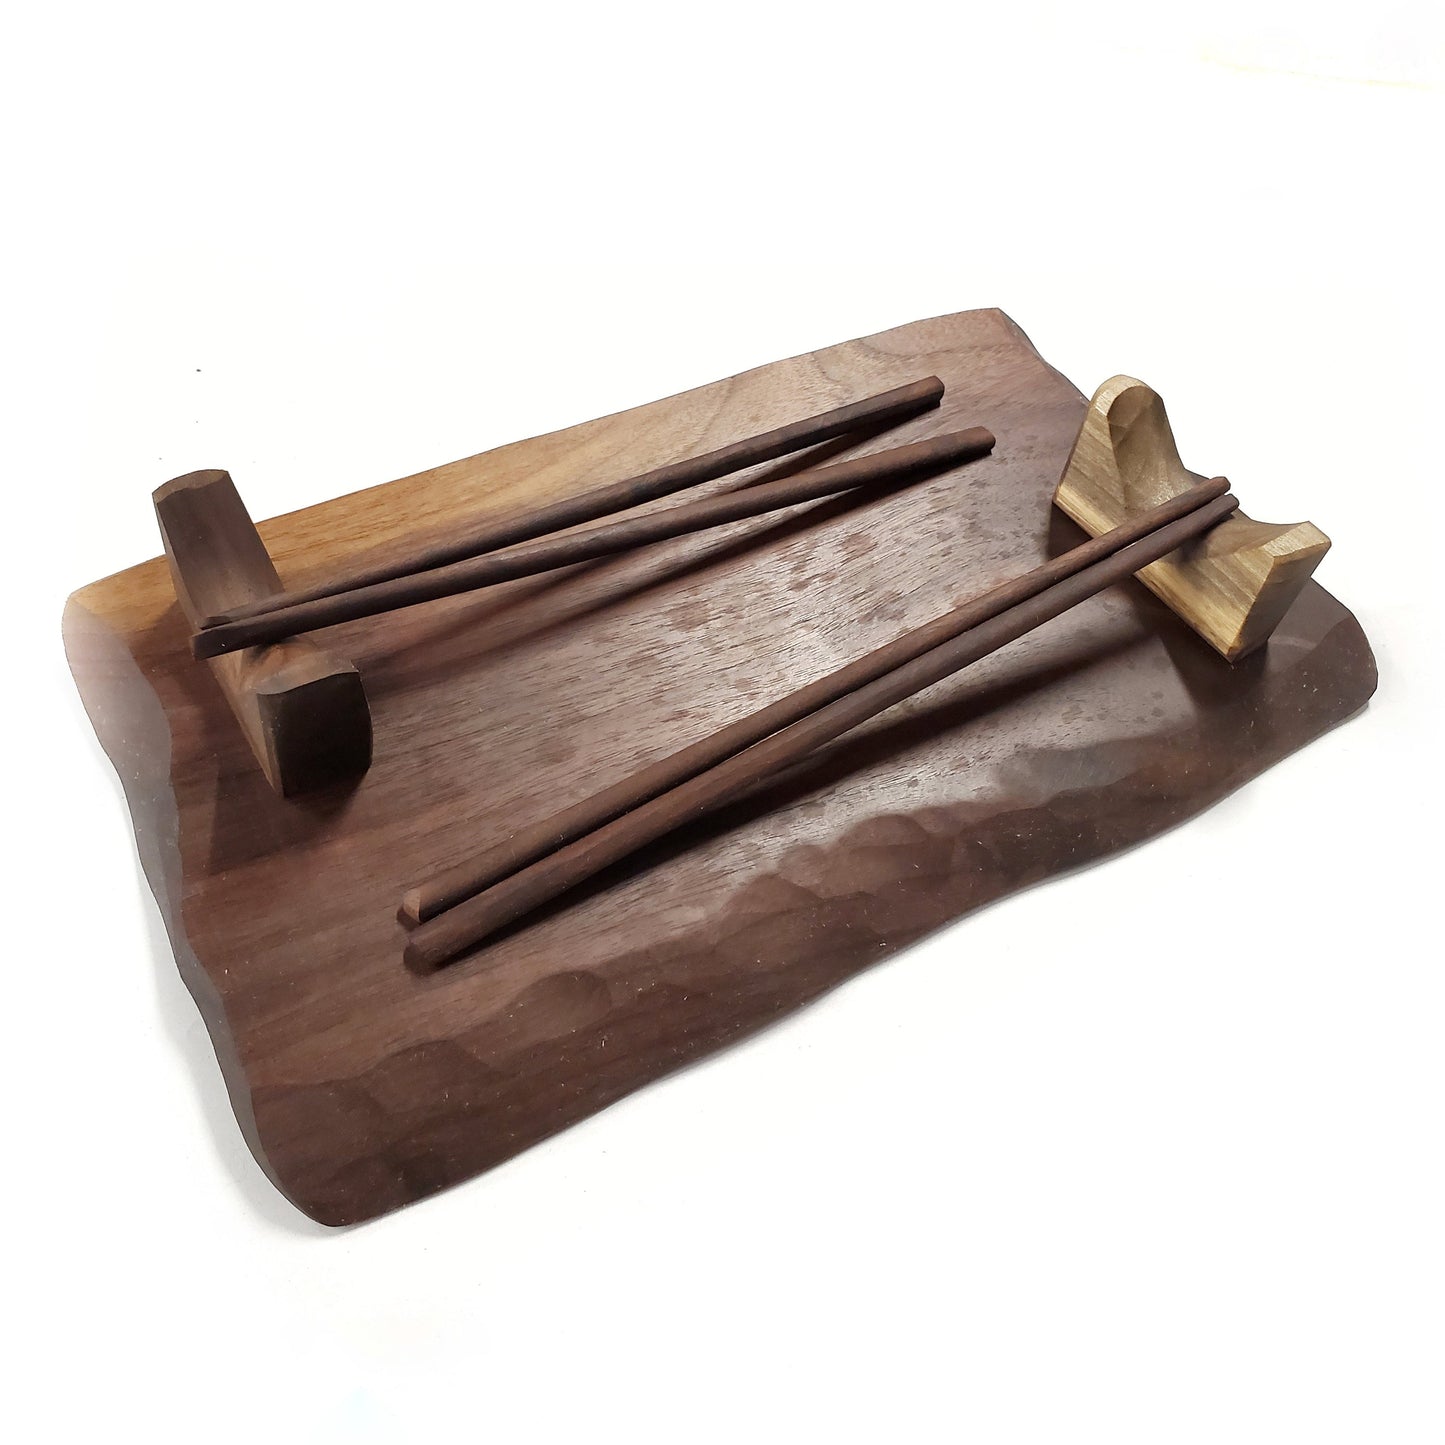 Chopstick and Sushi Serving Platter Set - Handmade Hand Carved Cherry Wood (Sale Price: $141.94 CAD)